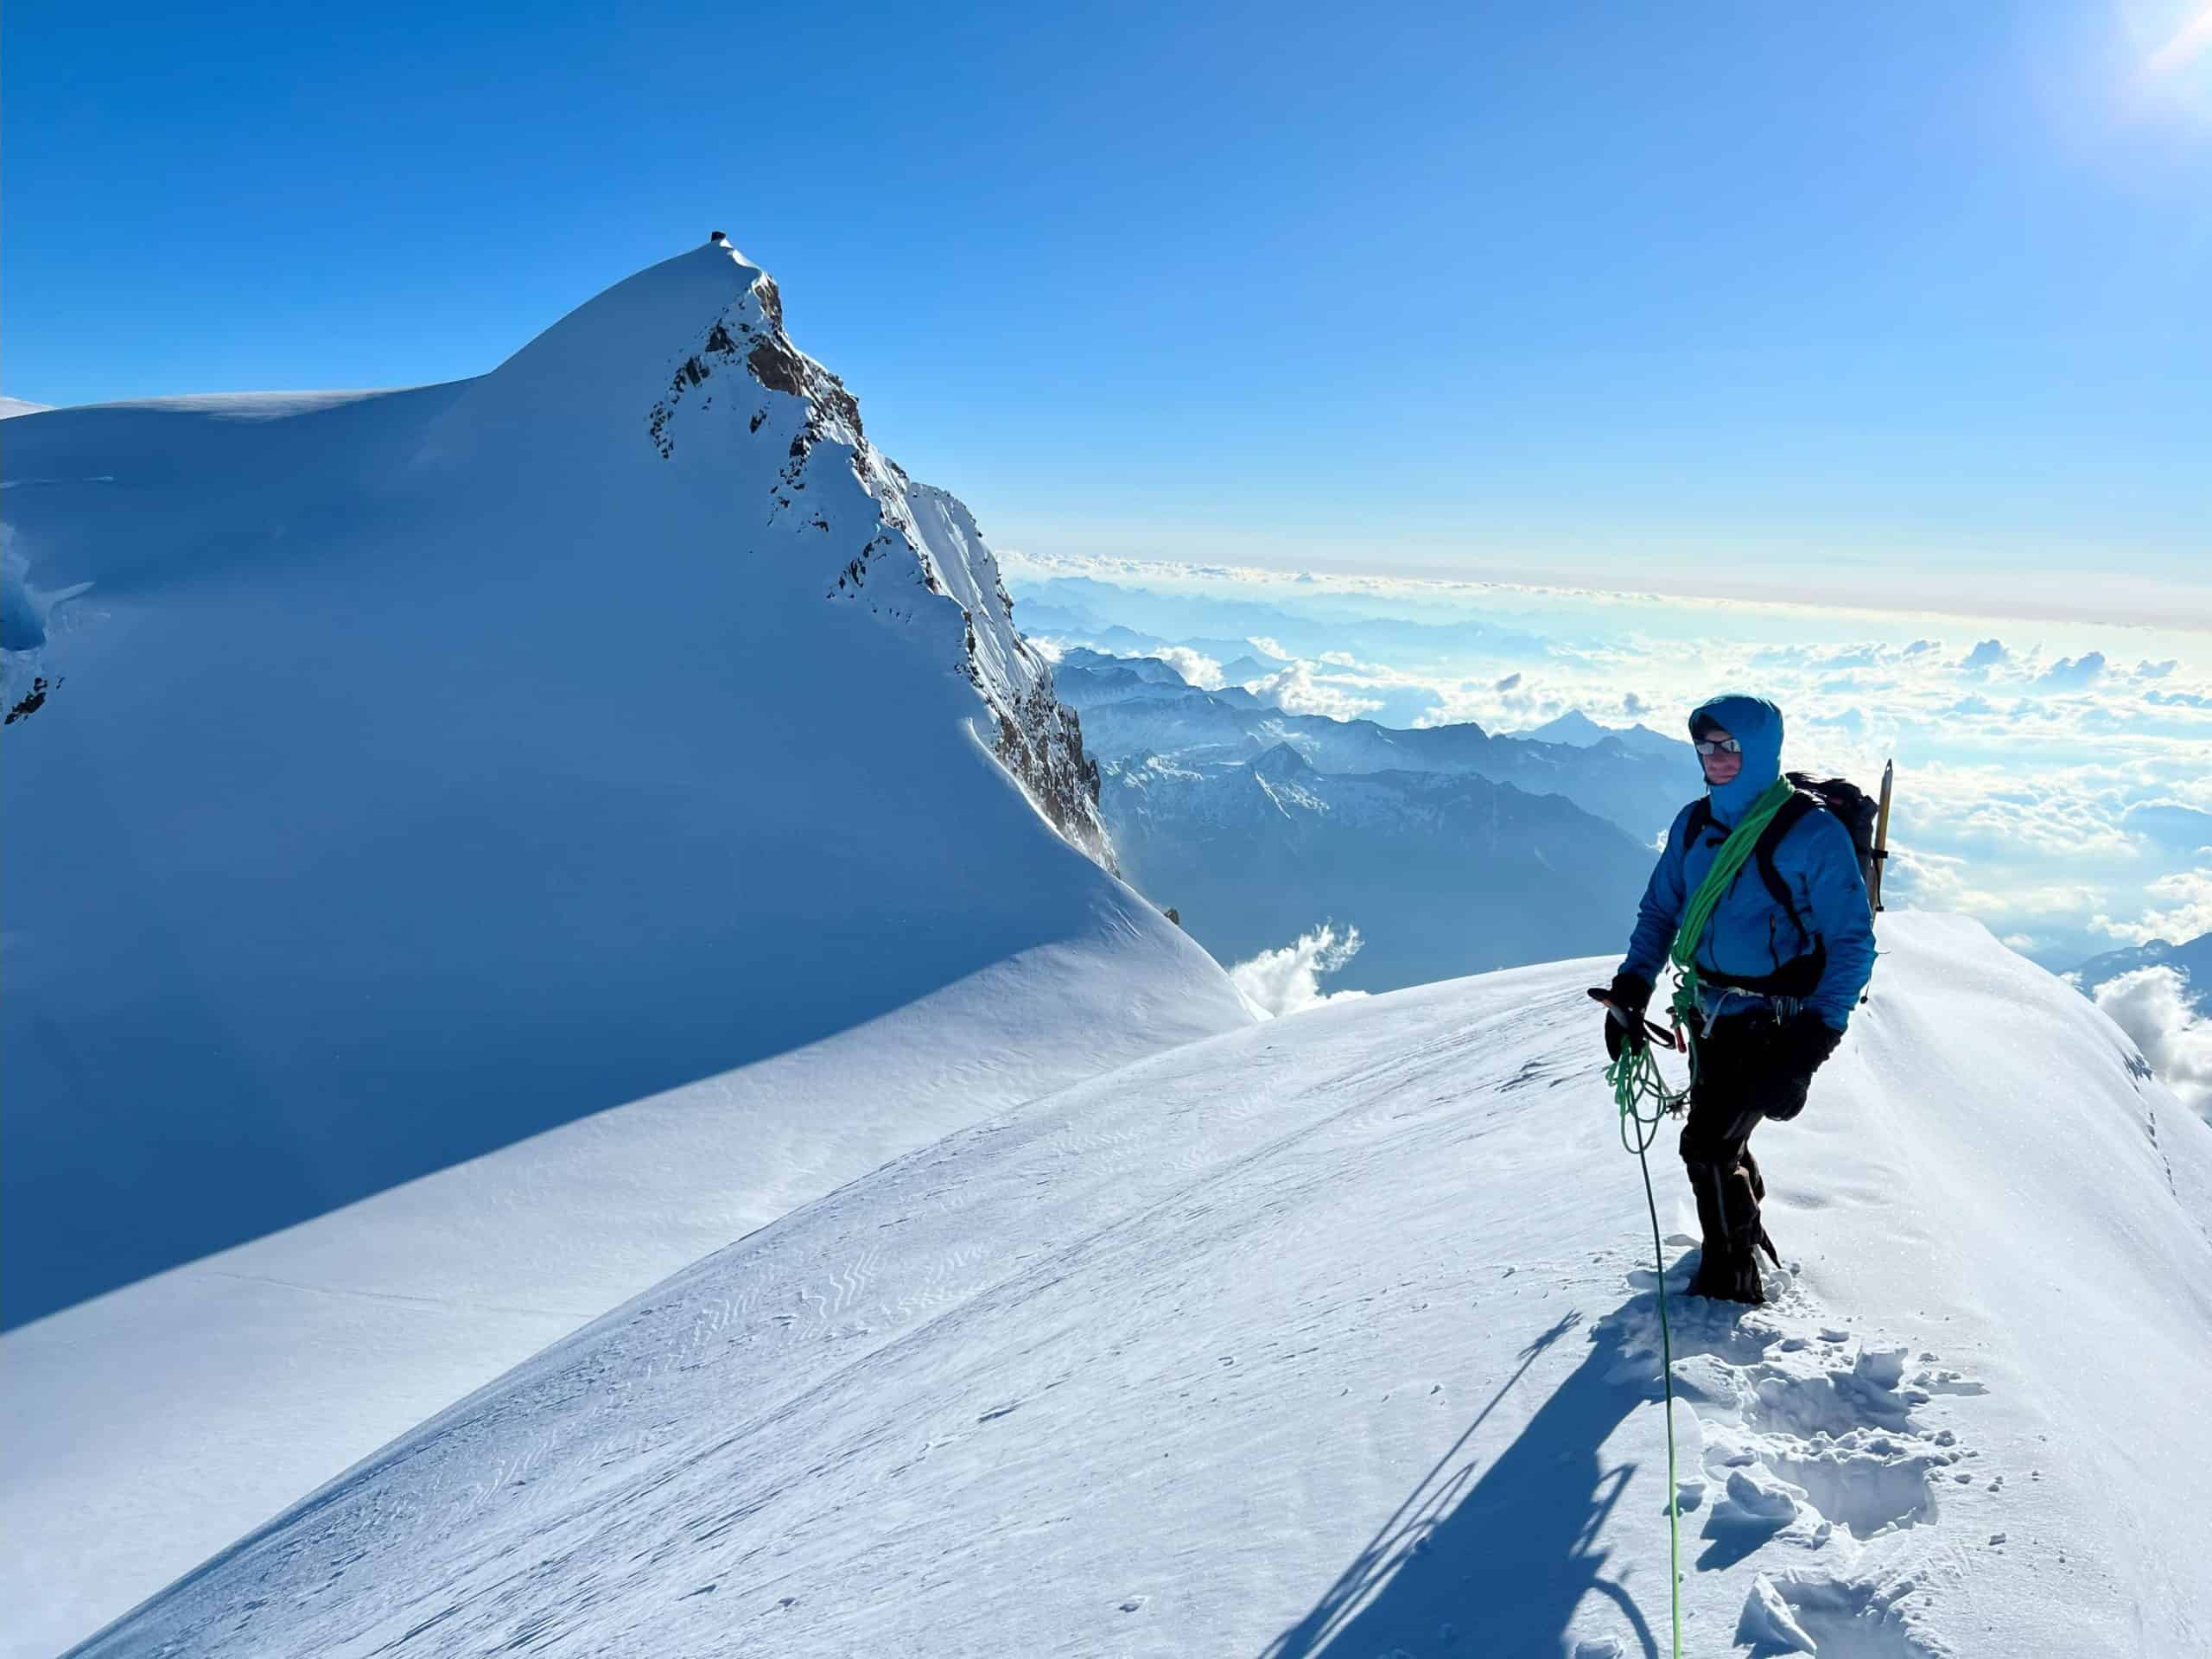 Mountain guide at the Parrotspitze with views of the horizon and the summit